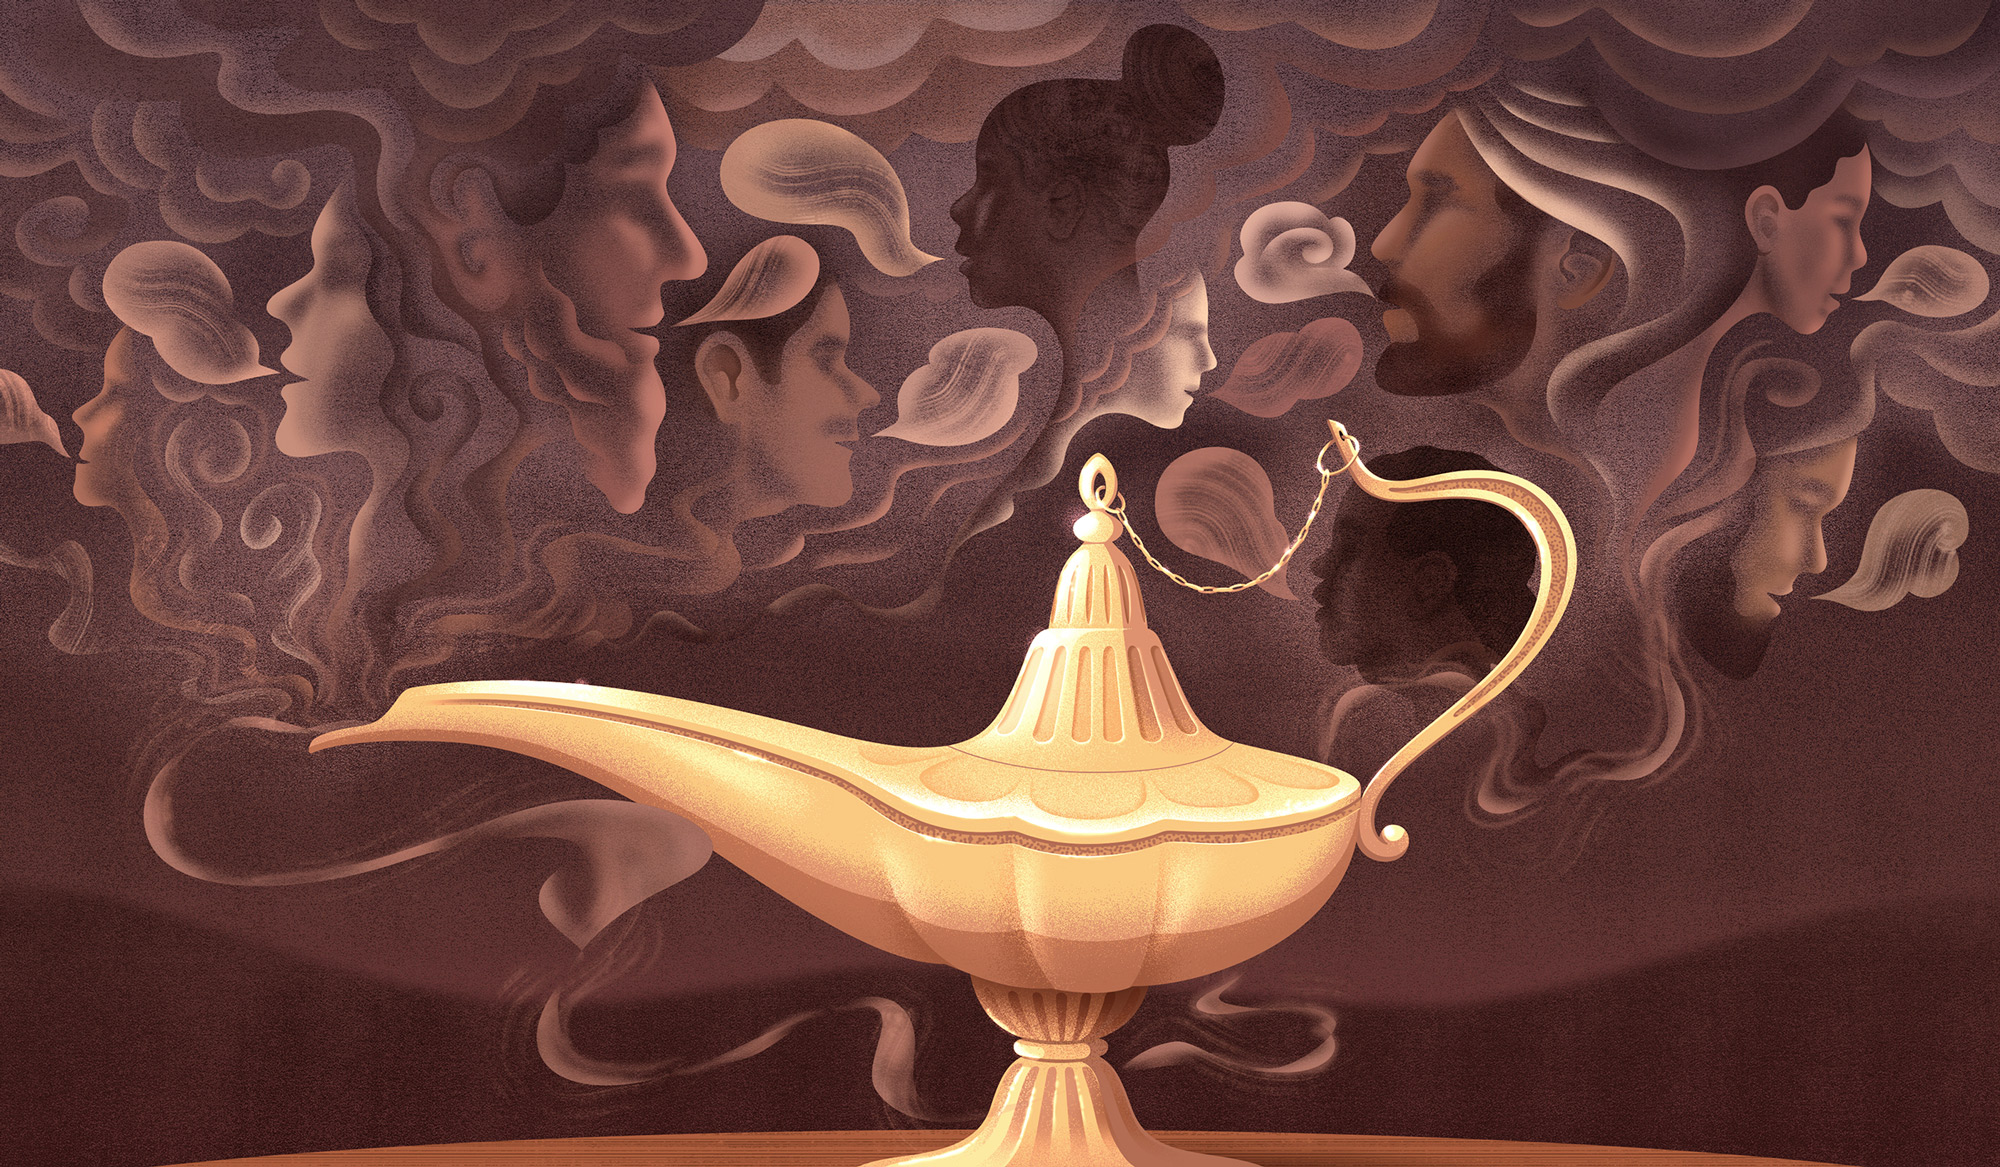 Illustration for Longreads, 'Let Me Show You The World', on the history of Aladdin